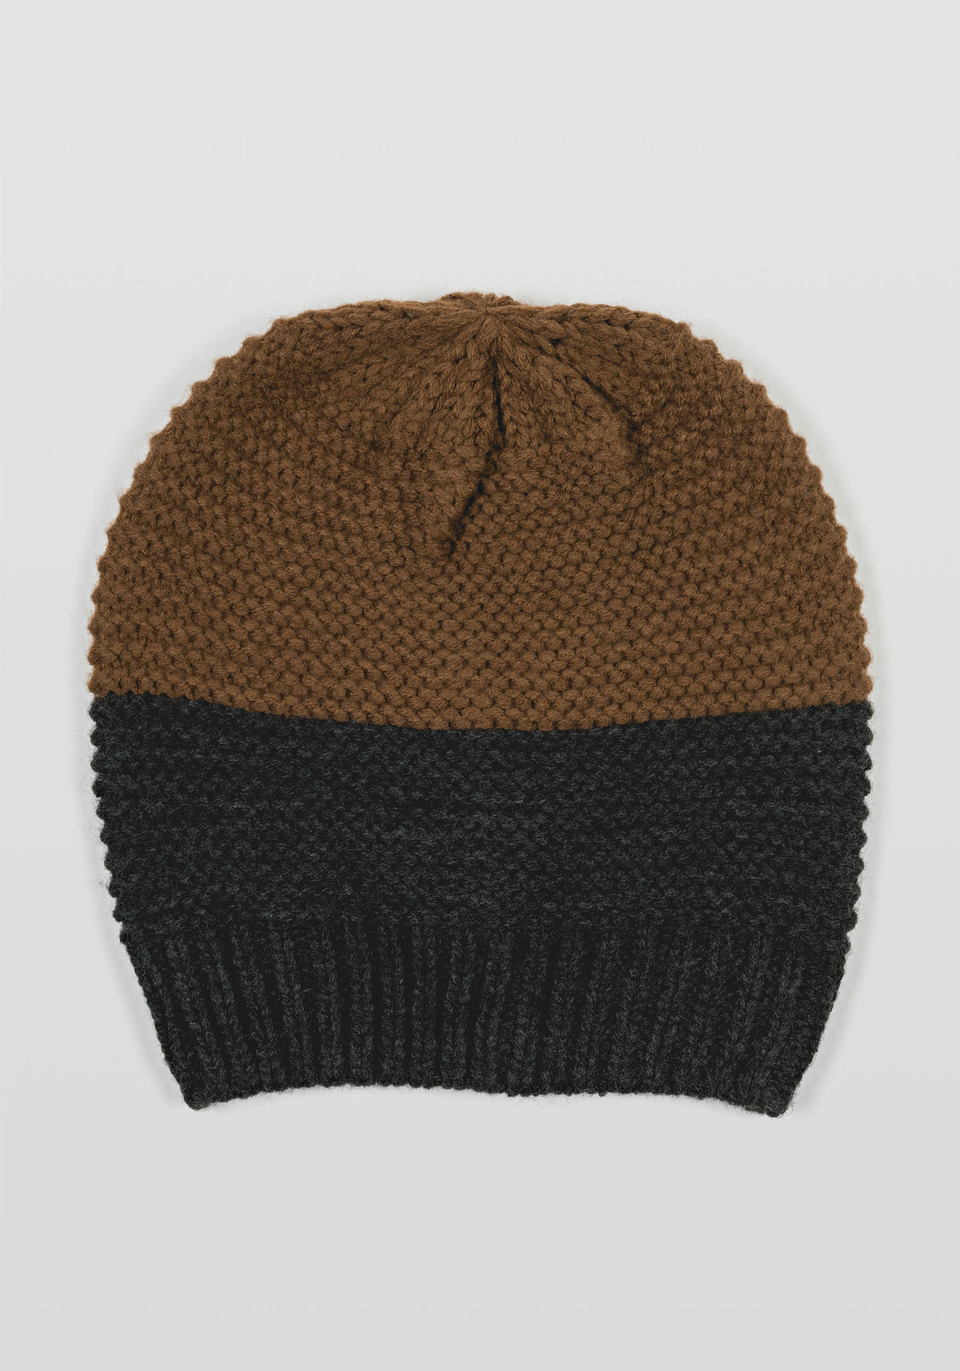 TWO-TONE KNITTED BEANIE - Antony Morato Online Shop